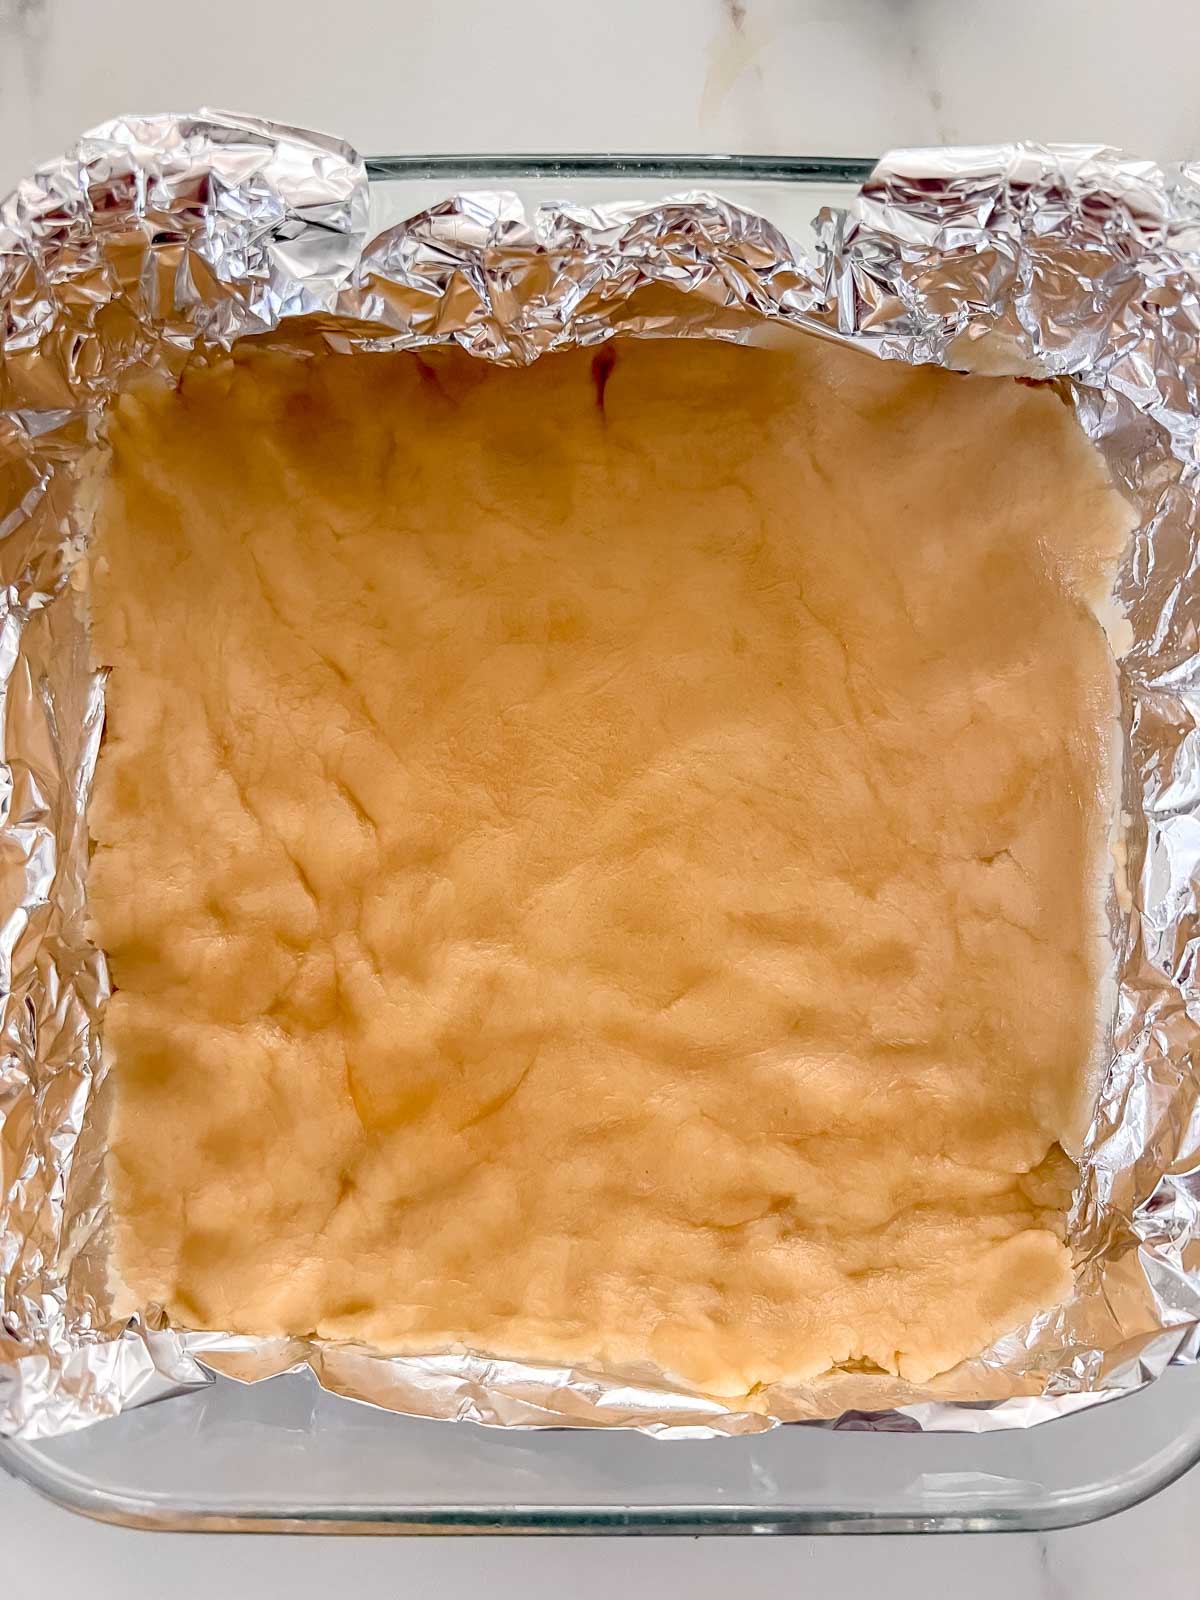 The vegan shortbread crust uncooked in an 8x8 pan with foil covering the pan. 